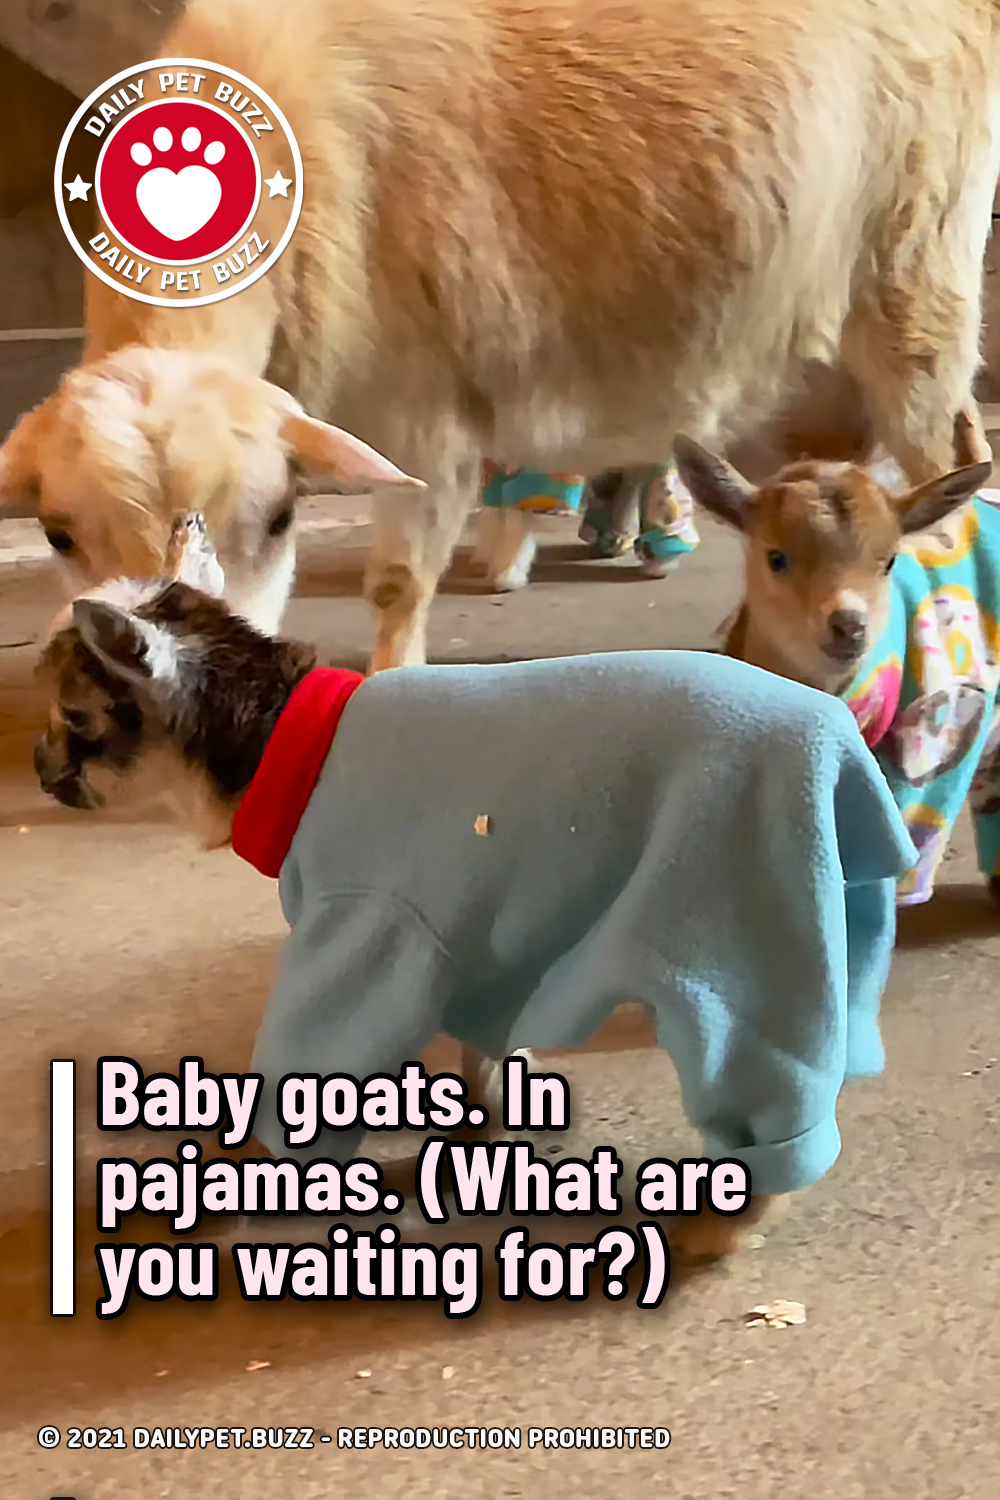 Baby goats. In pajamas. (What are you waiting for?)